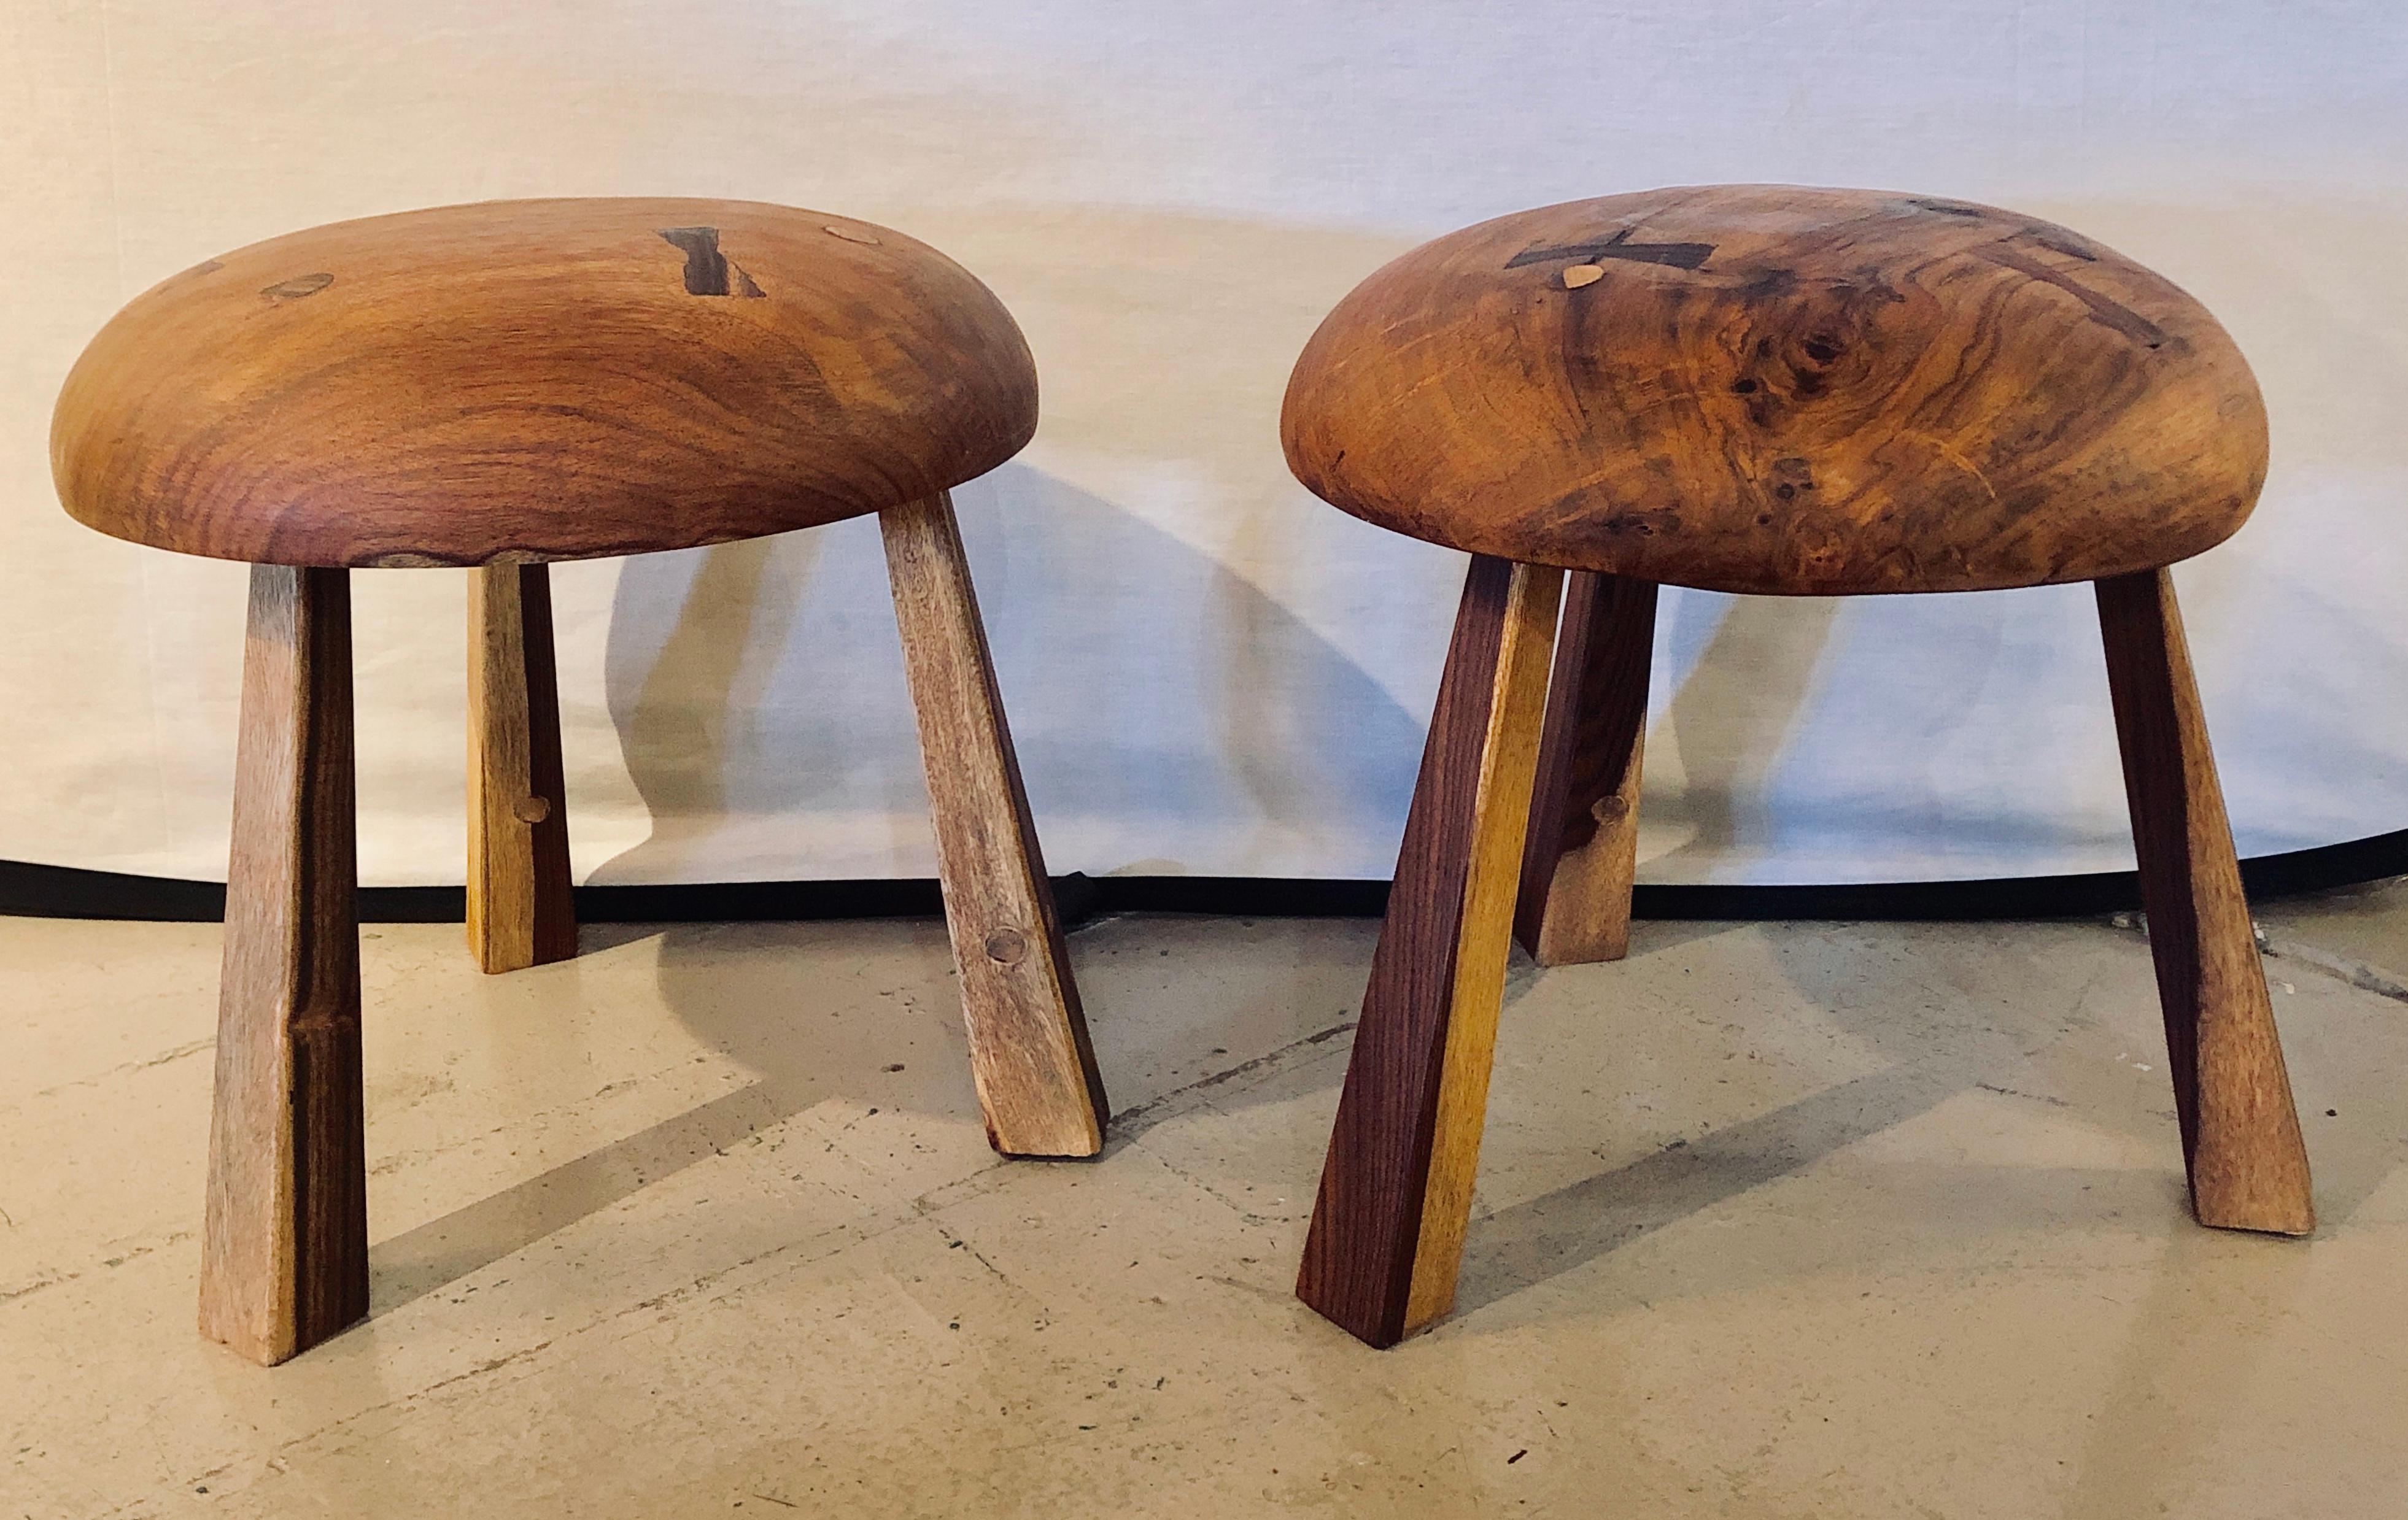 Pair of small wood mushroom stools in the manner of Nakashima. These finely hand constructed stools are strong and sturdy made from all solid wood construction.